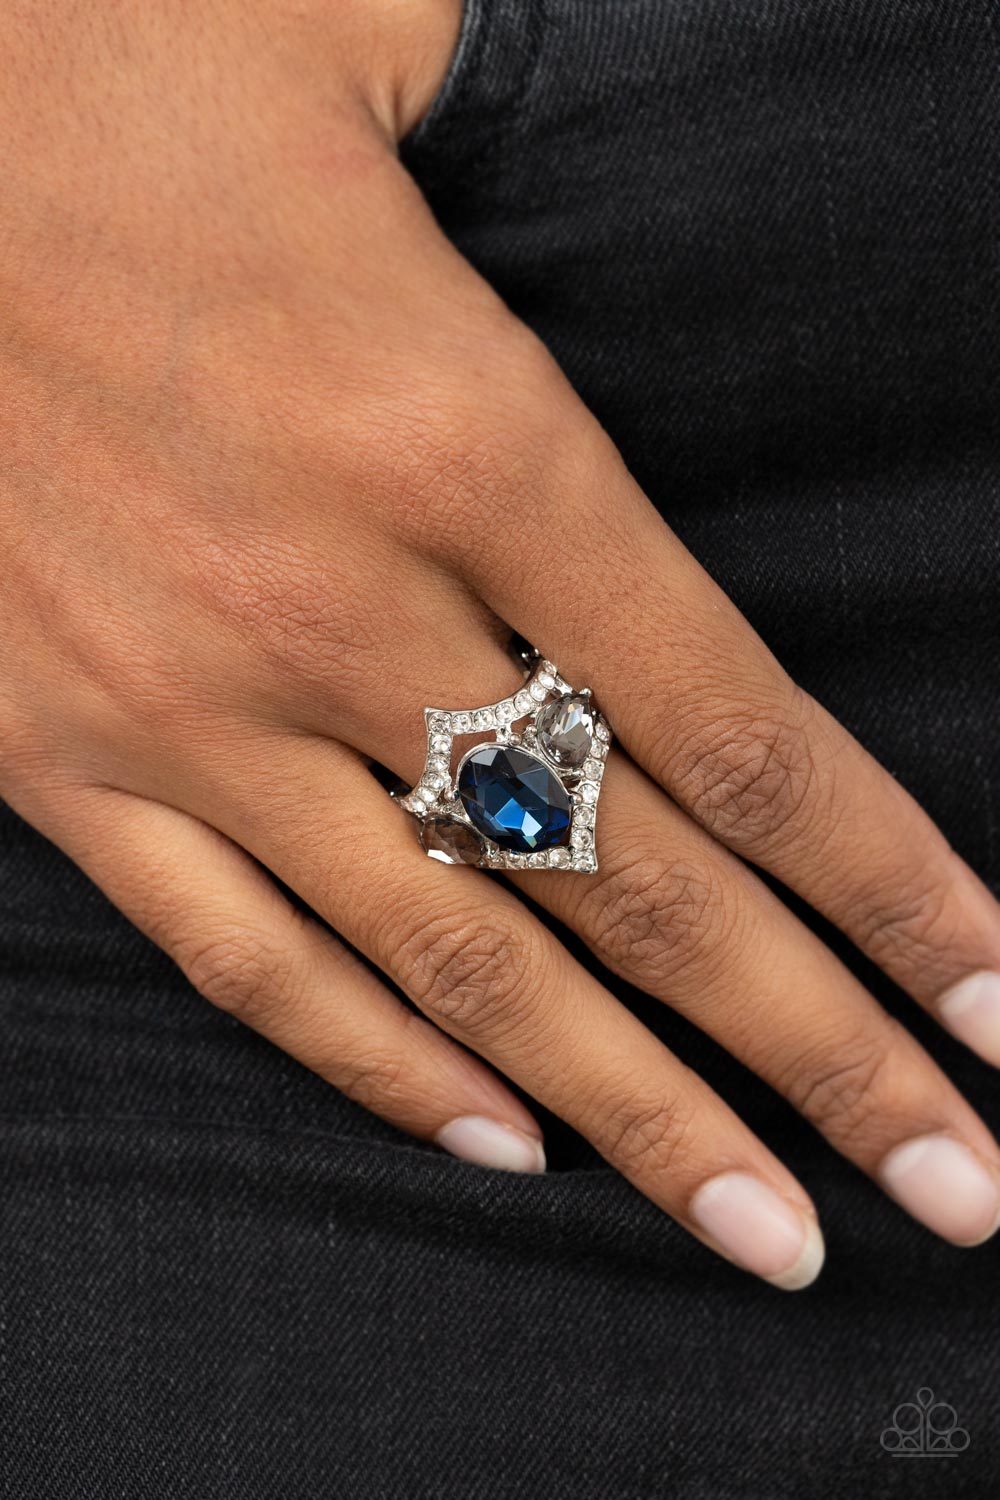 Bow Down to Dazzle Blue Rhinestone Ring - Paparazzi Accessories- lightbox - CarasShop.com - $5 Jewelry by Cara Jewels